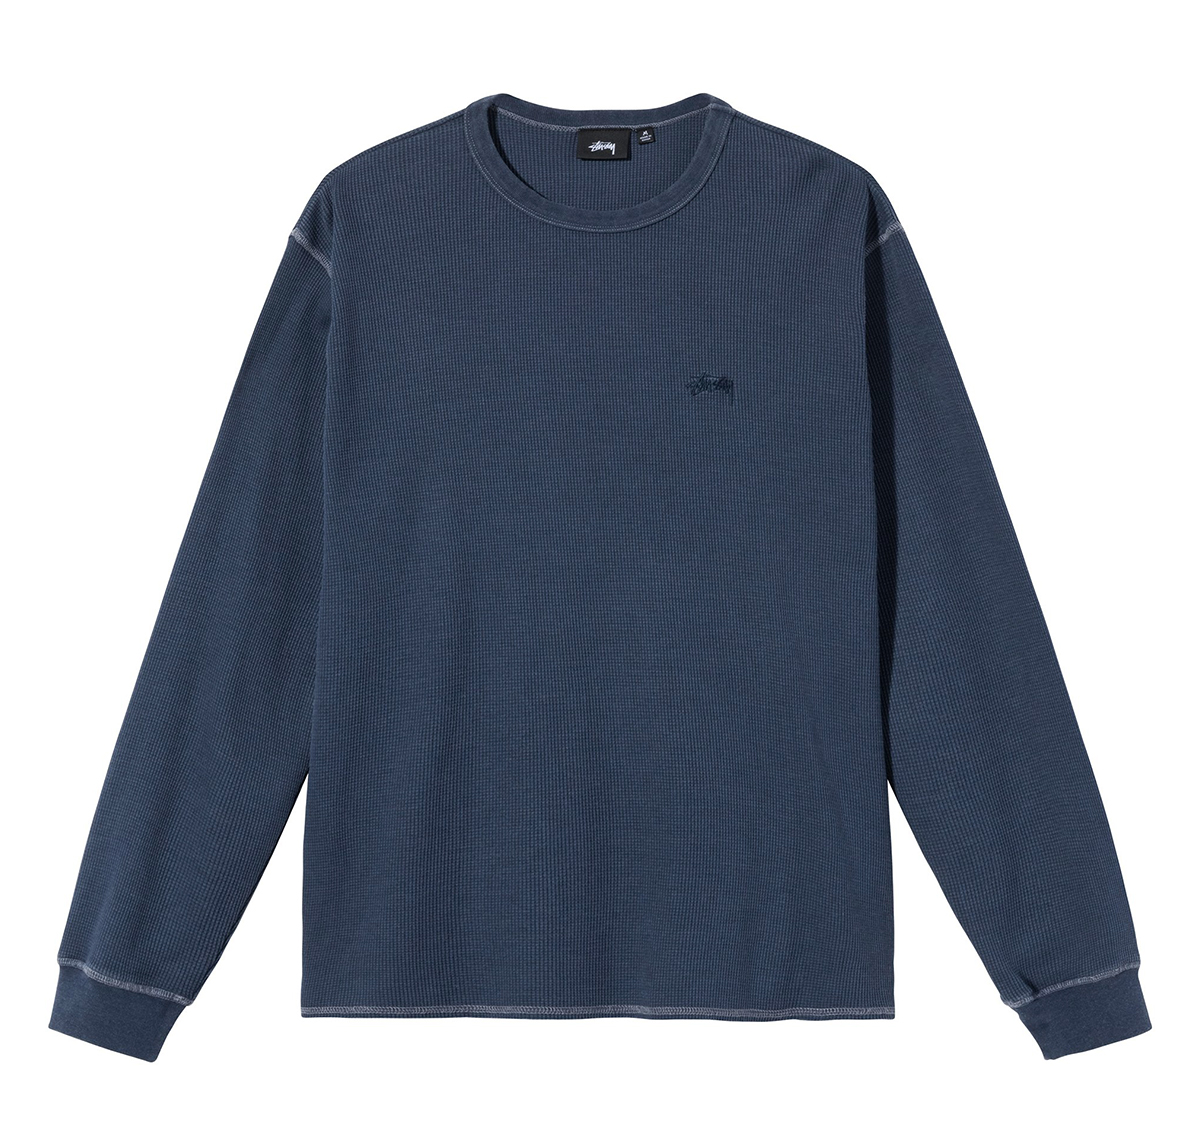 Stüssy Dyed Thermal - Navy front